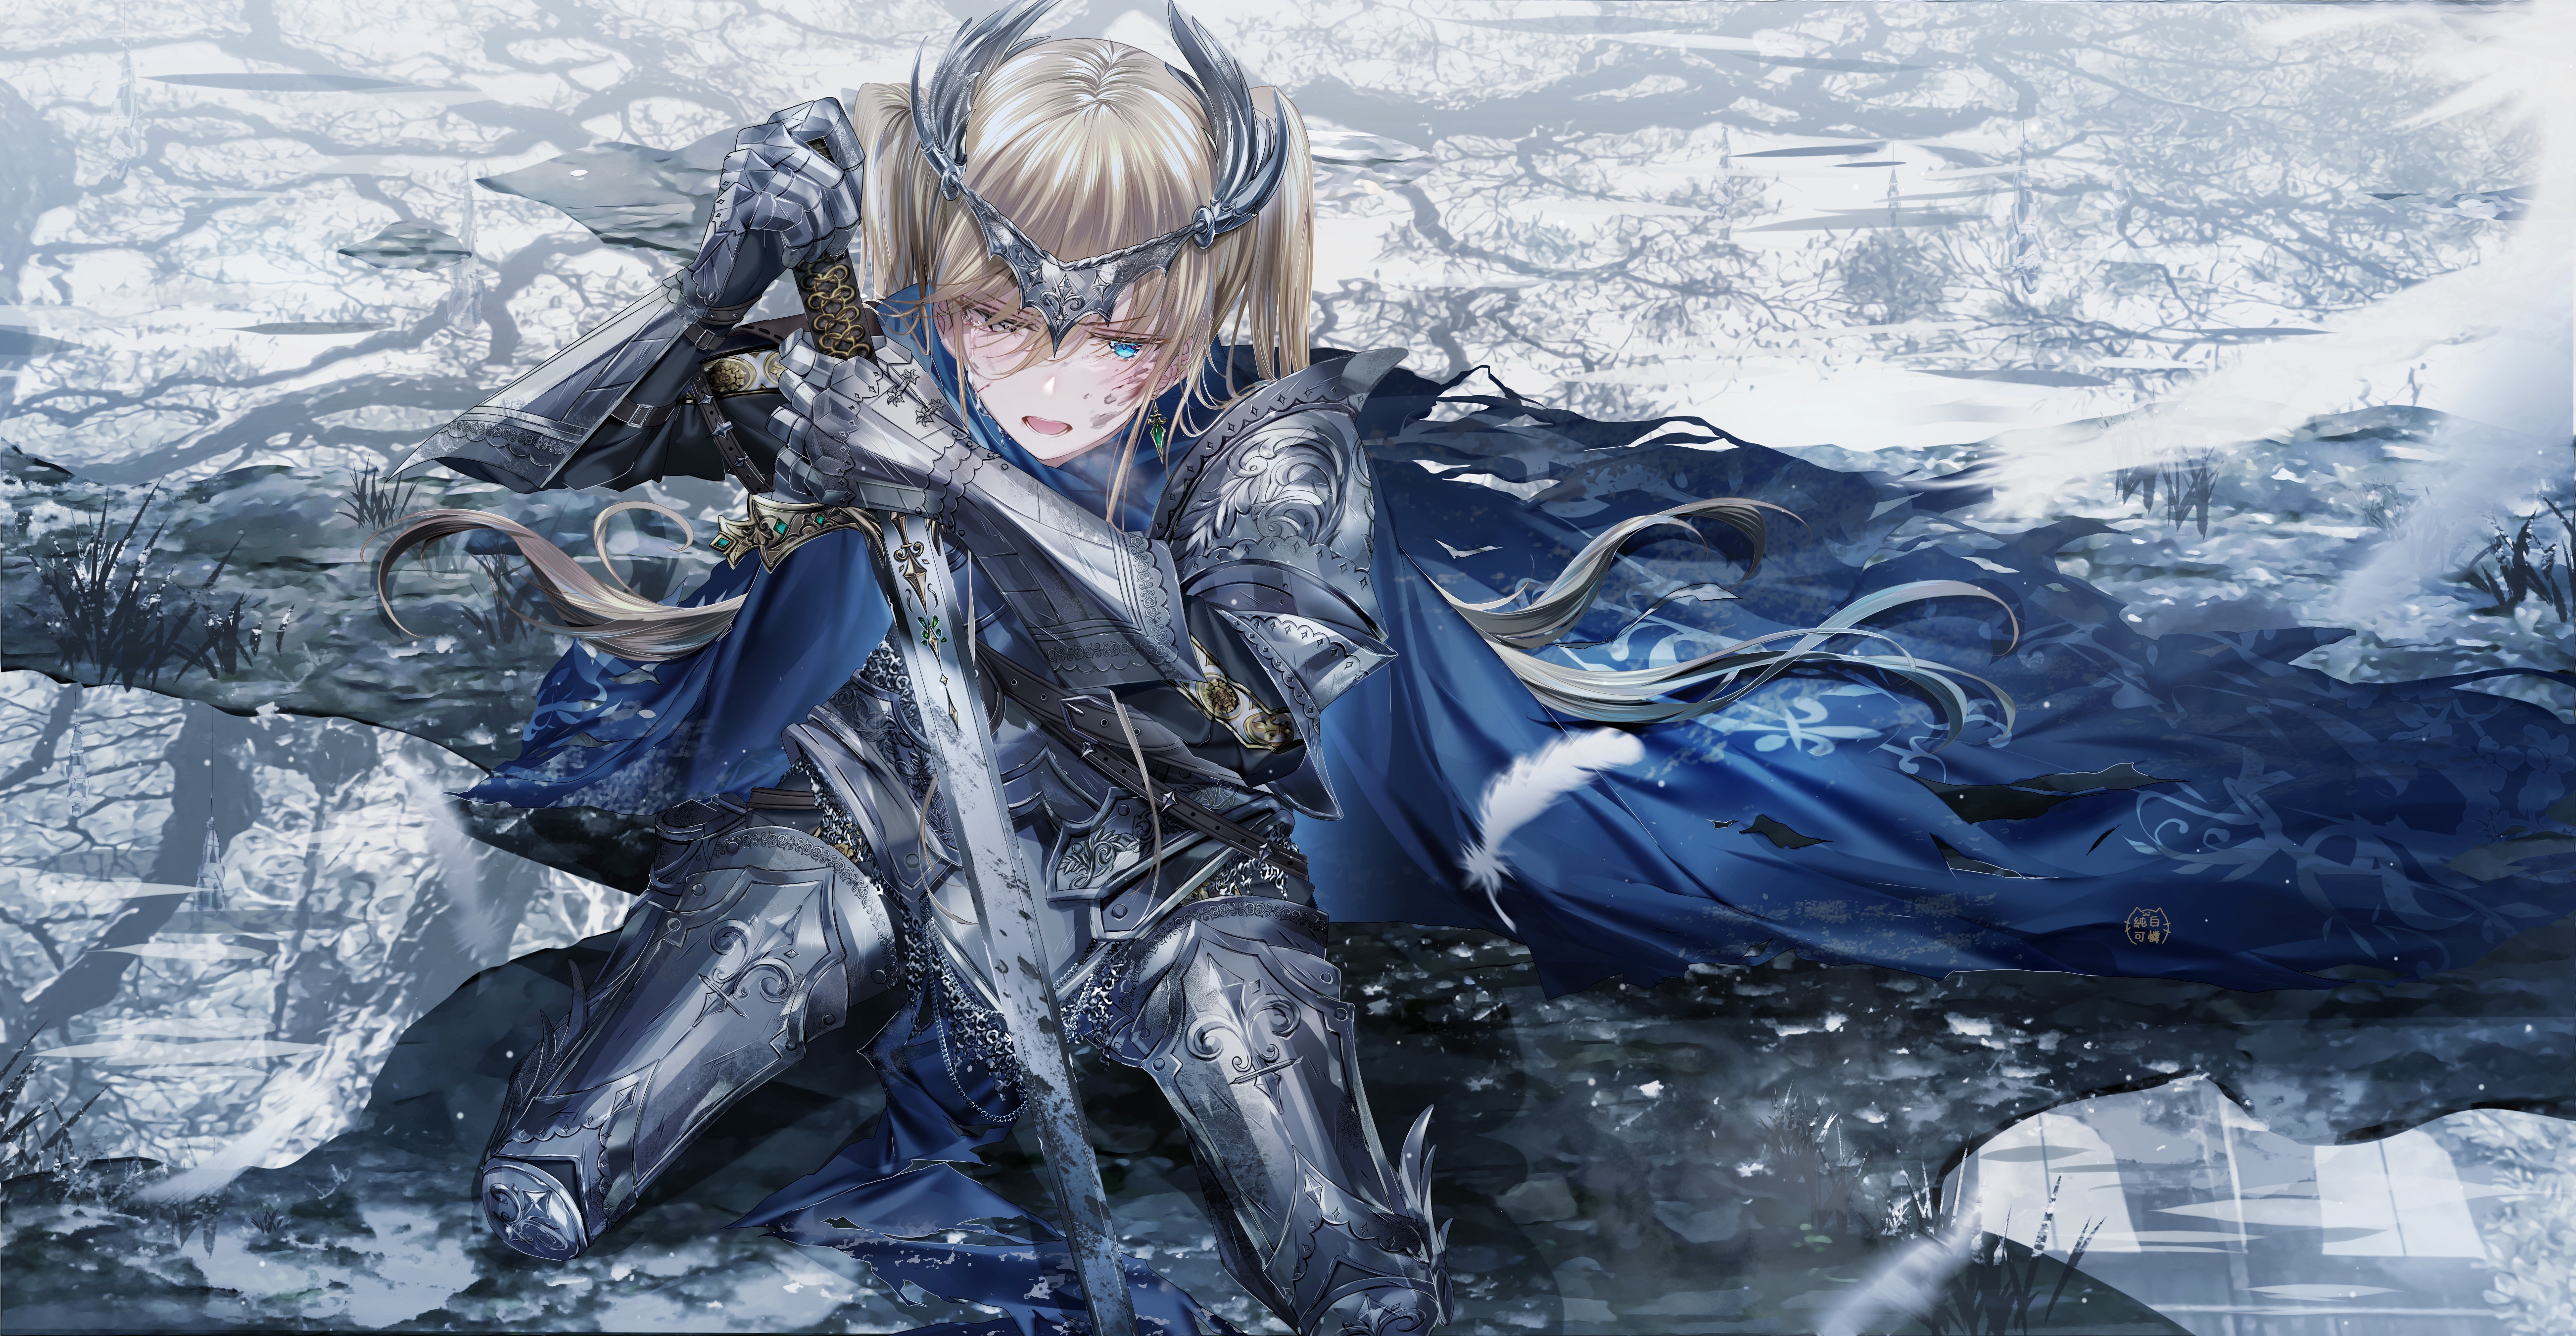 Anime Girl Knight in Blue Armor - wide 7